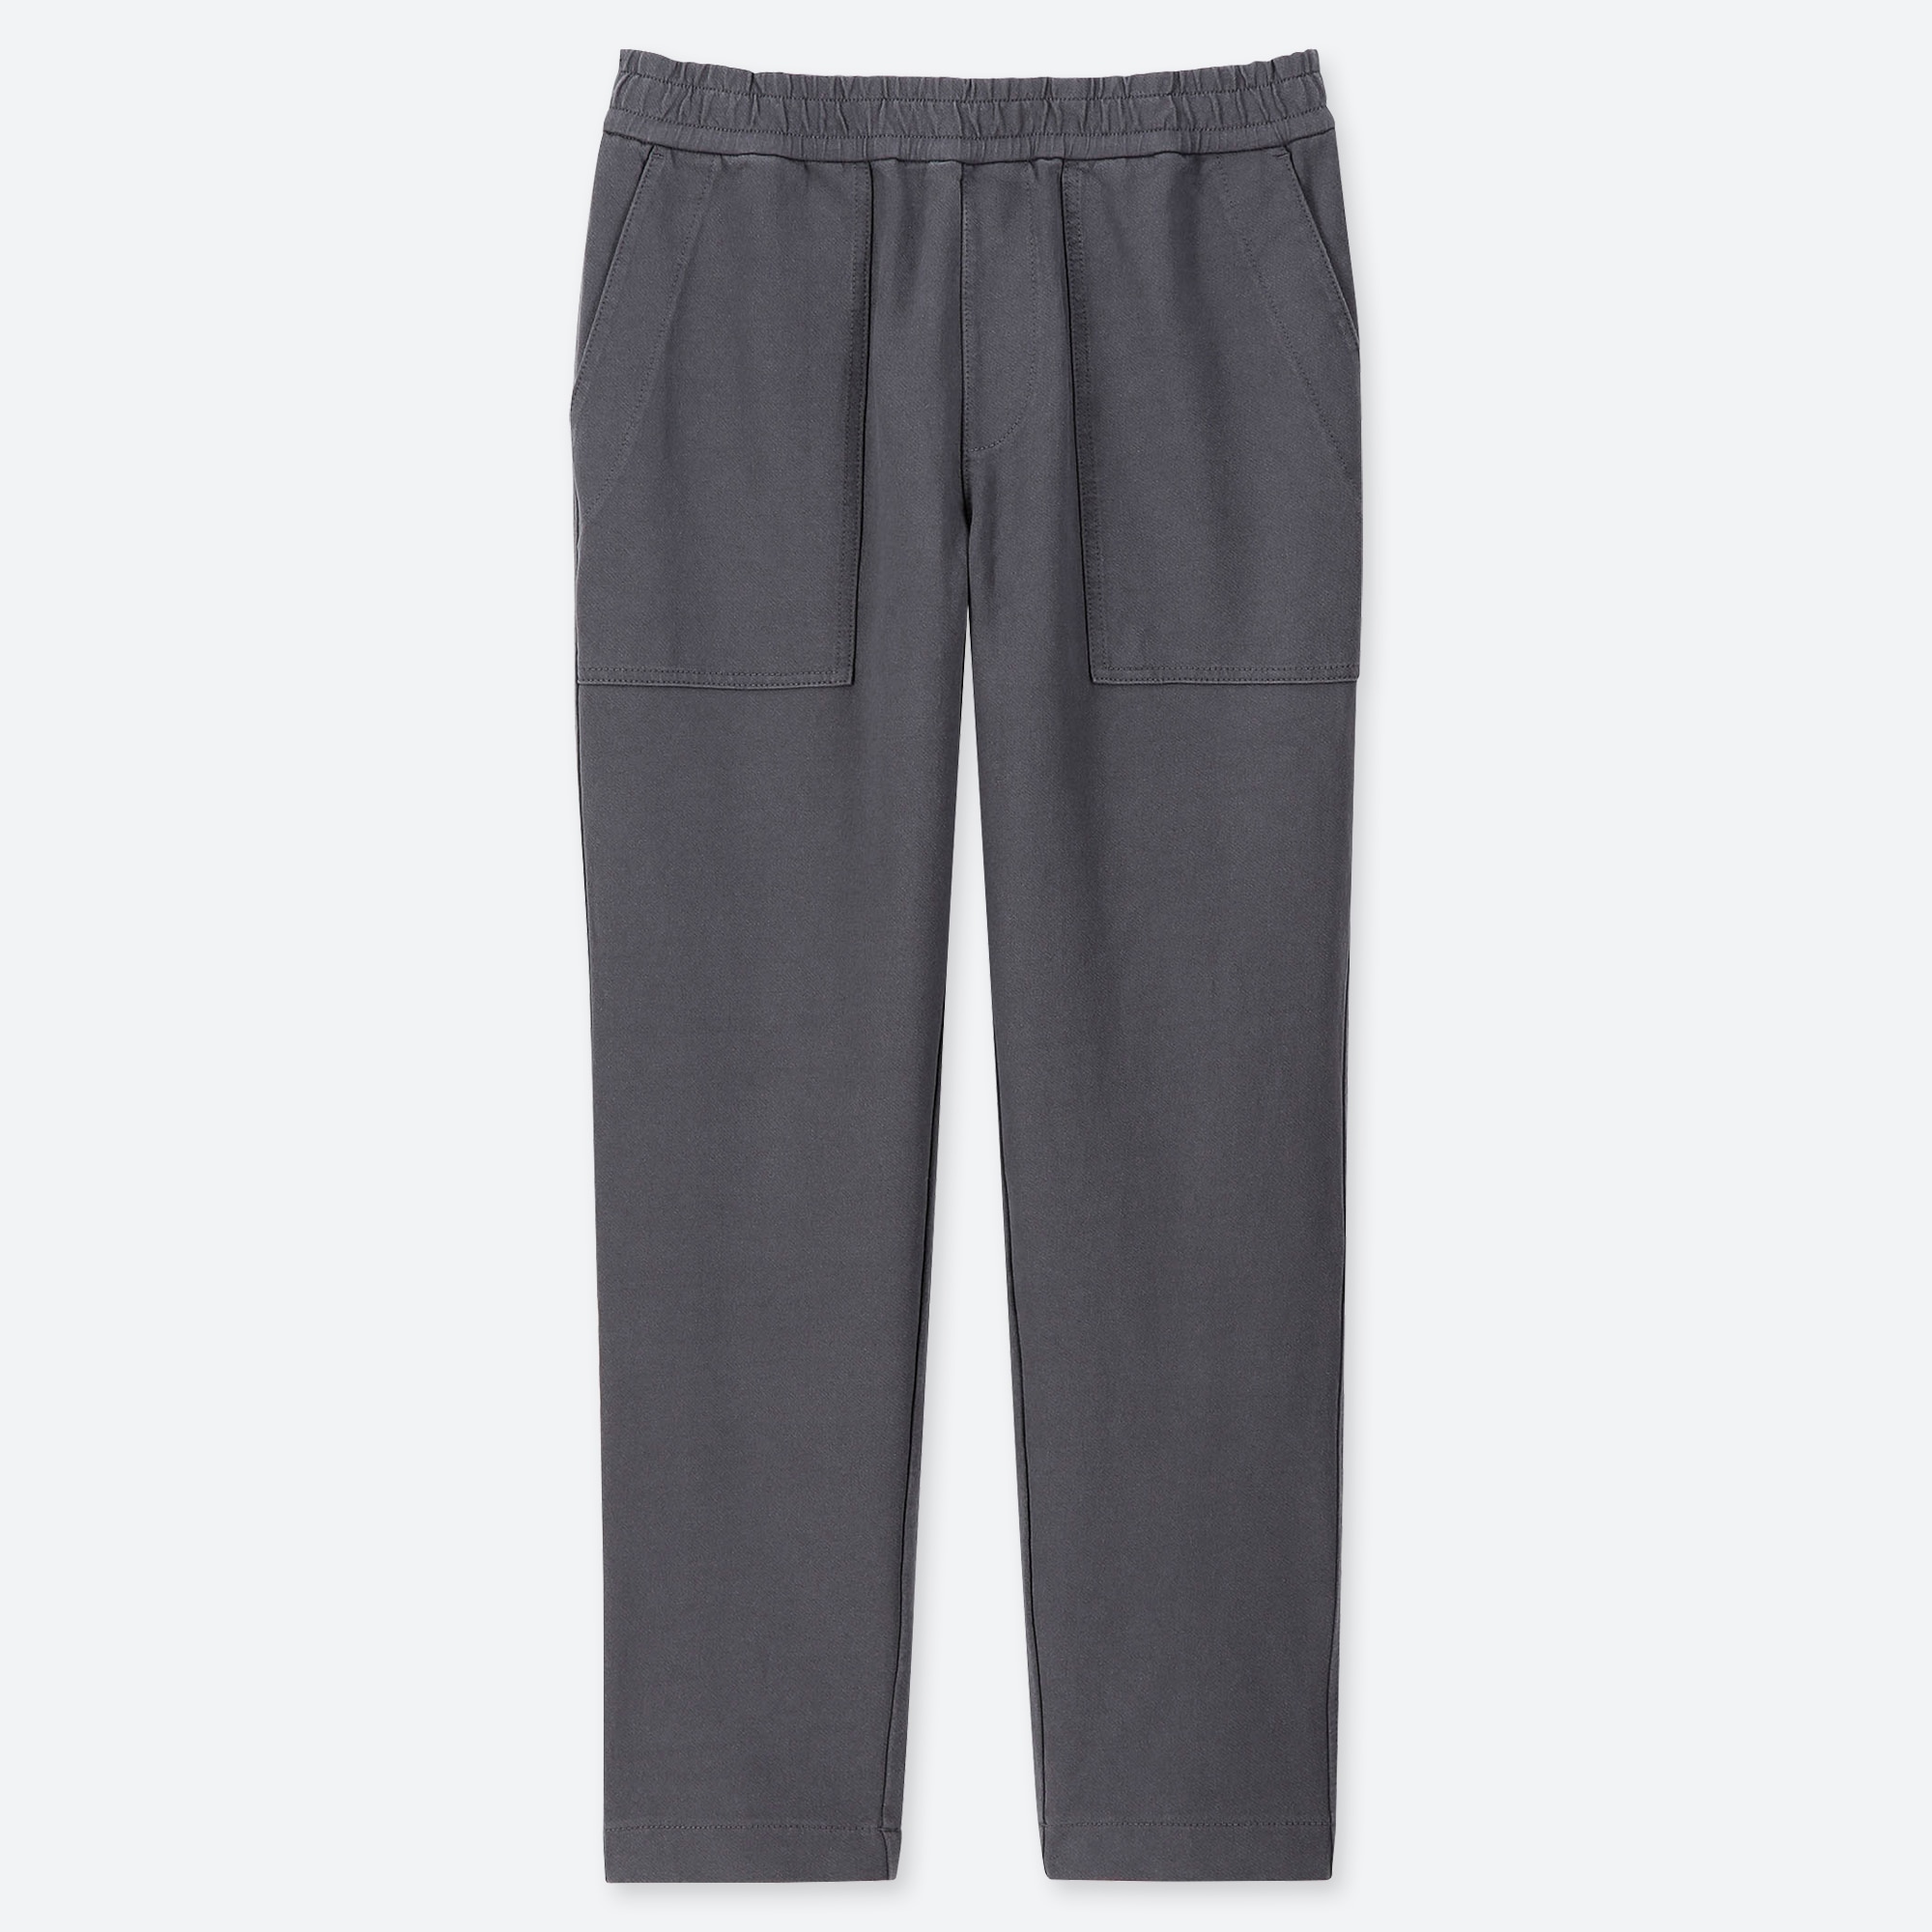 MEN WASHED JERSEY ANKLE-LENGTH PANTS 